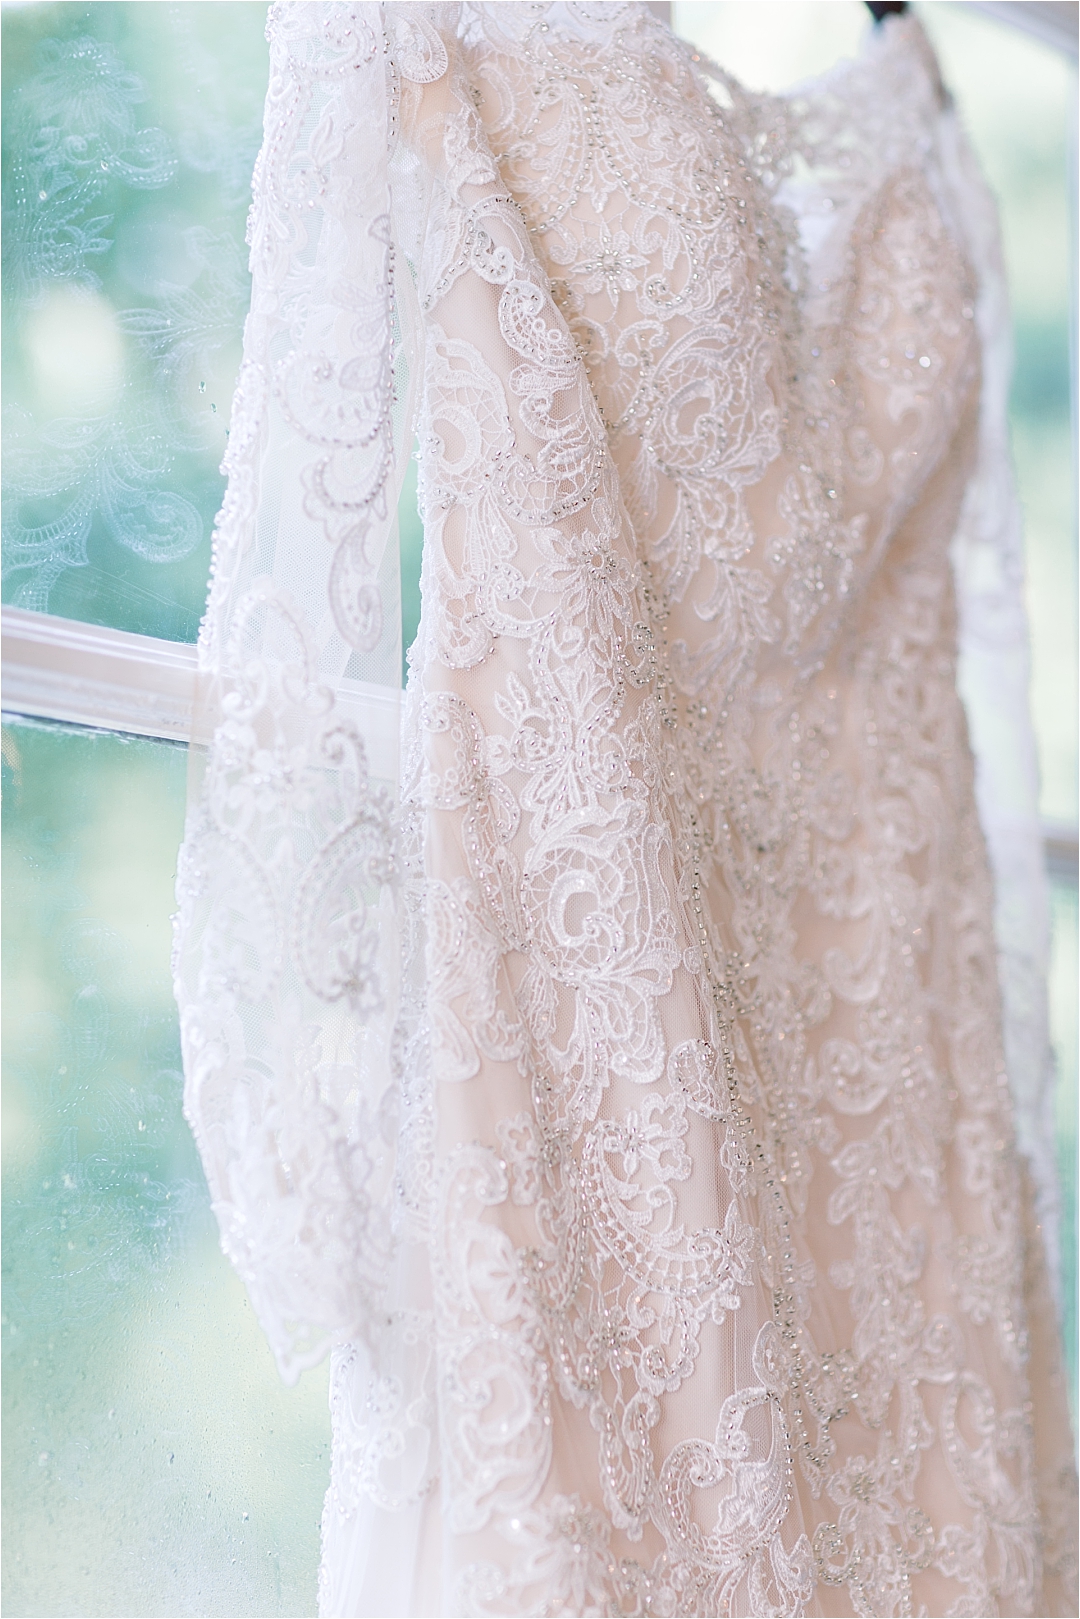 lace wedding dress in window_Photos by Leigh Wolfe, Atlanta's Top Wedding Photographer